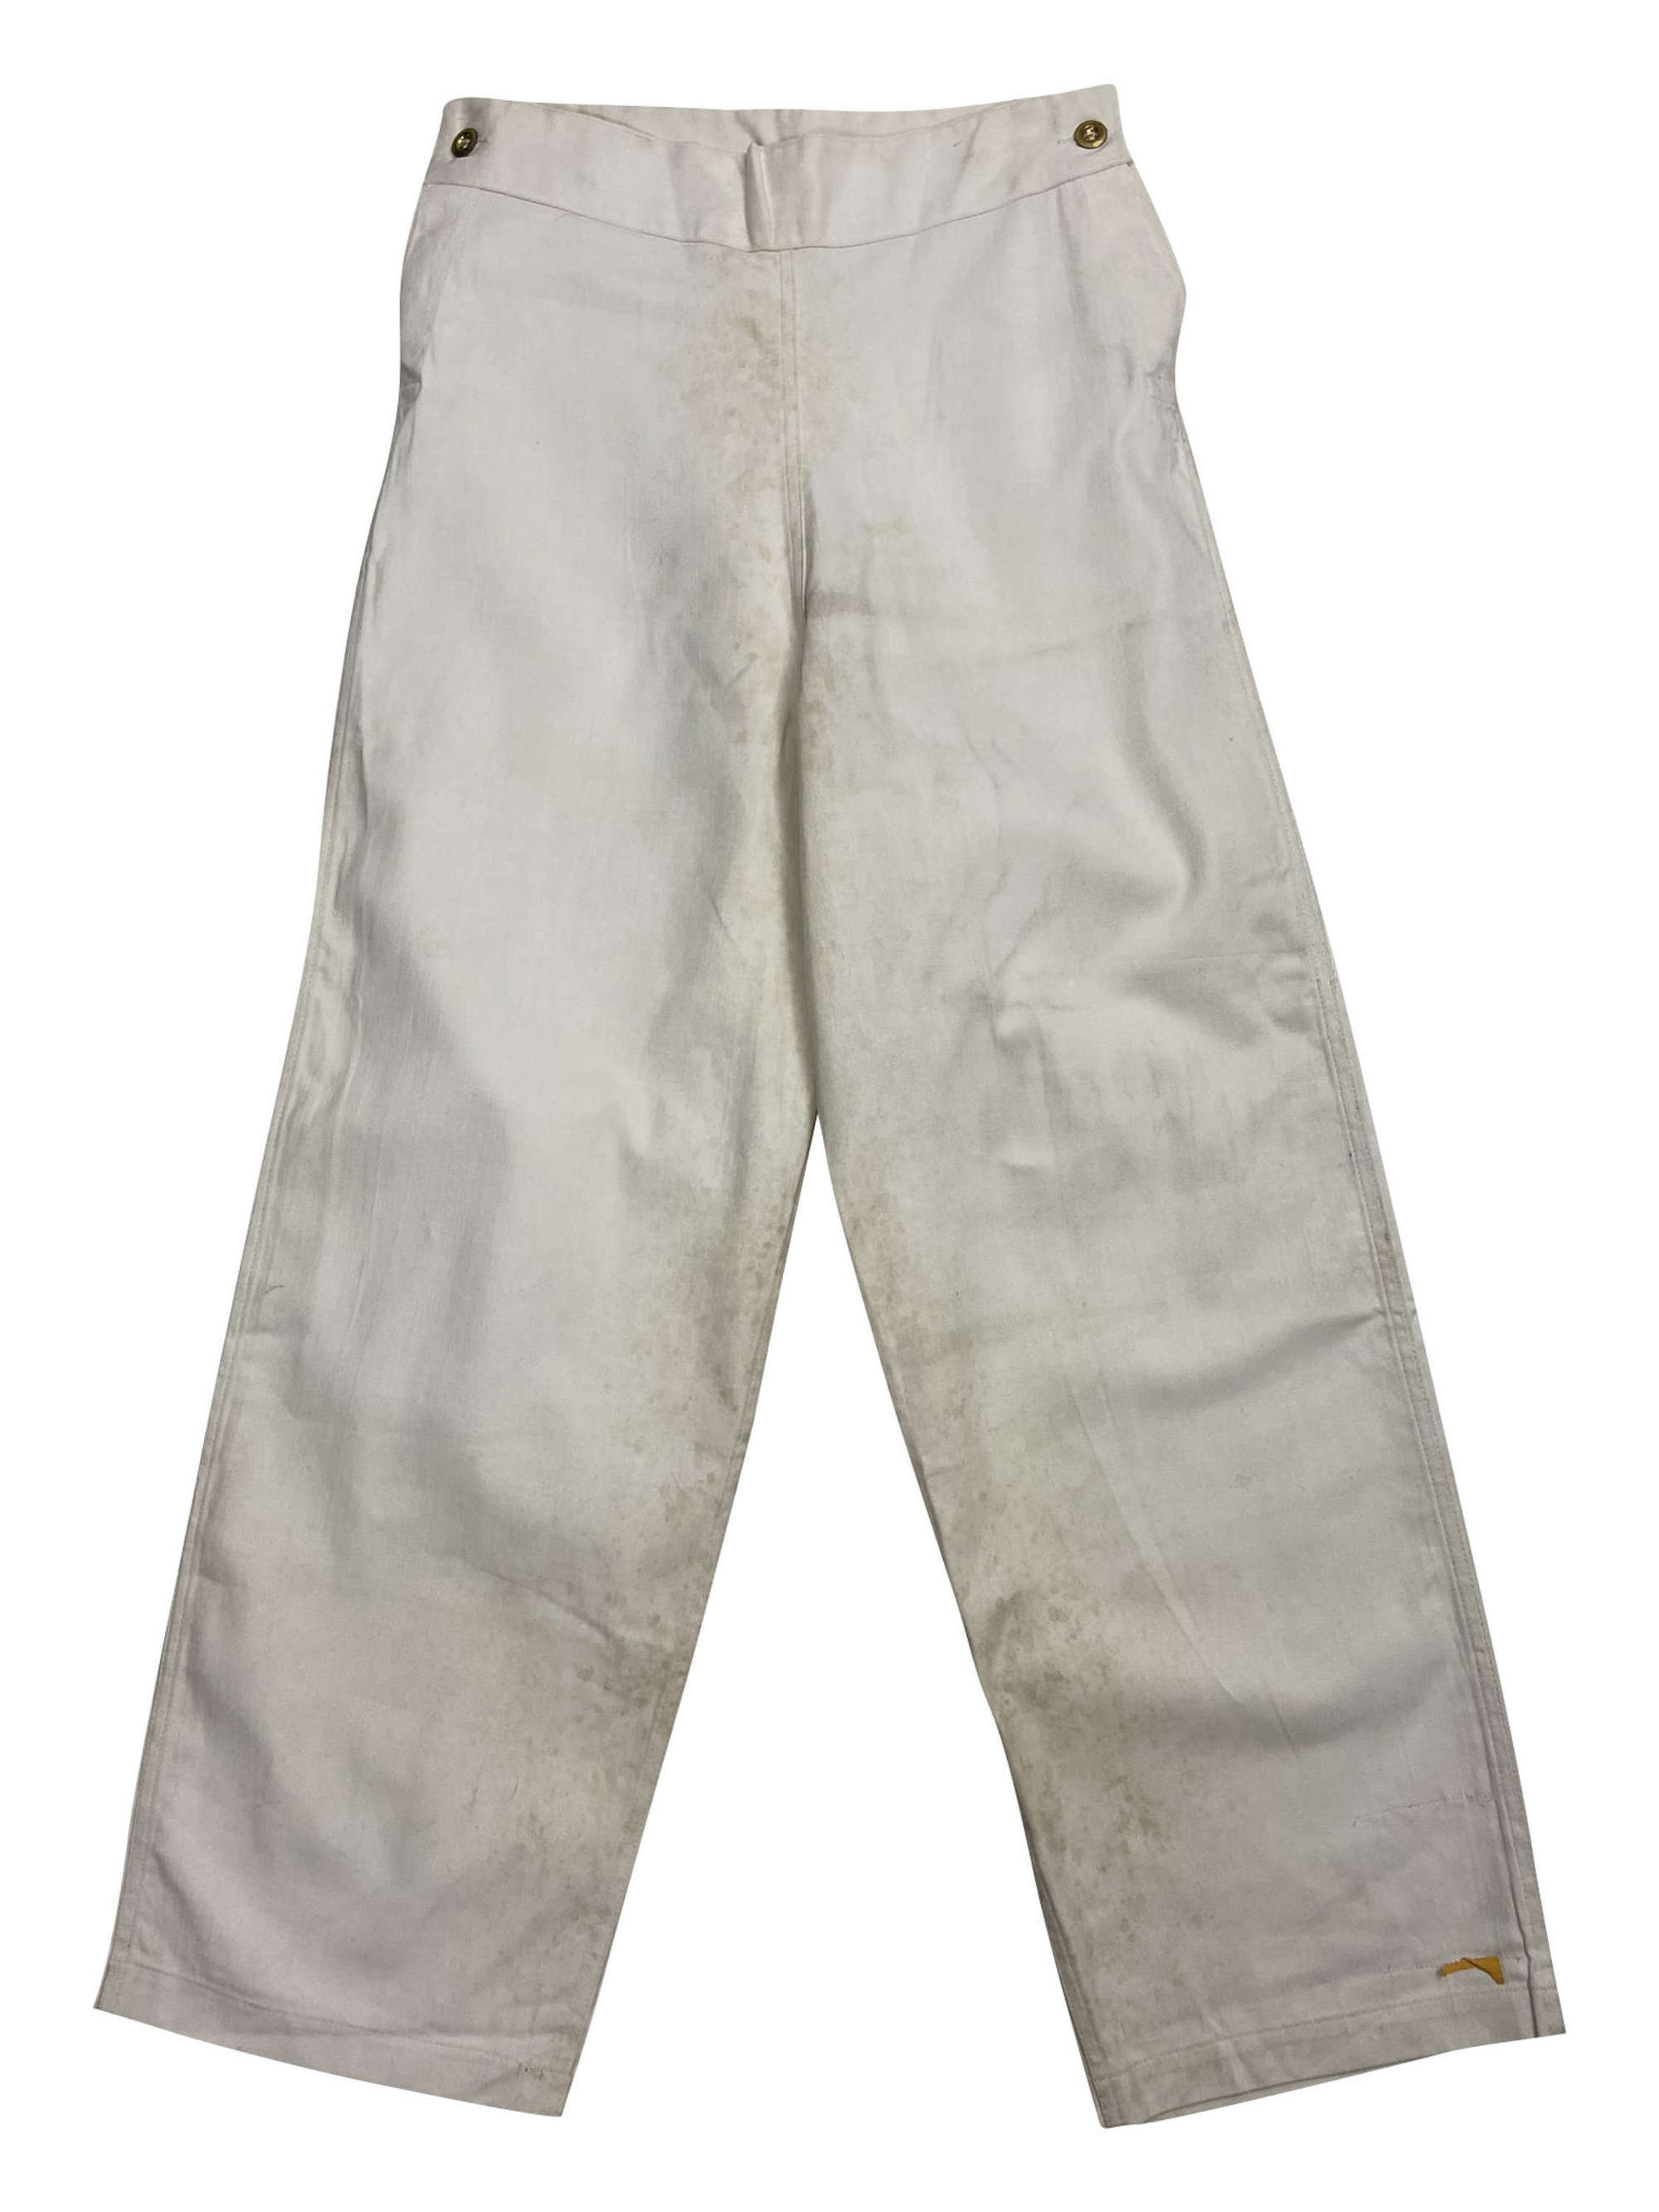 Original CC41 Royal Navy Cotton Drill Work Trousers by 'Digby Morton'2